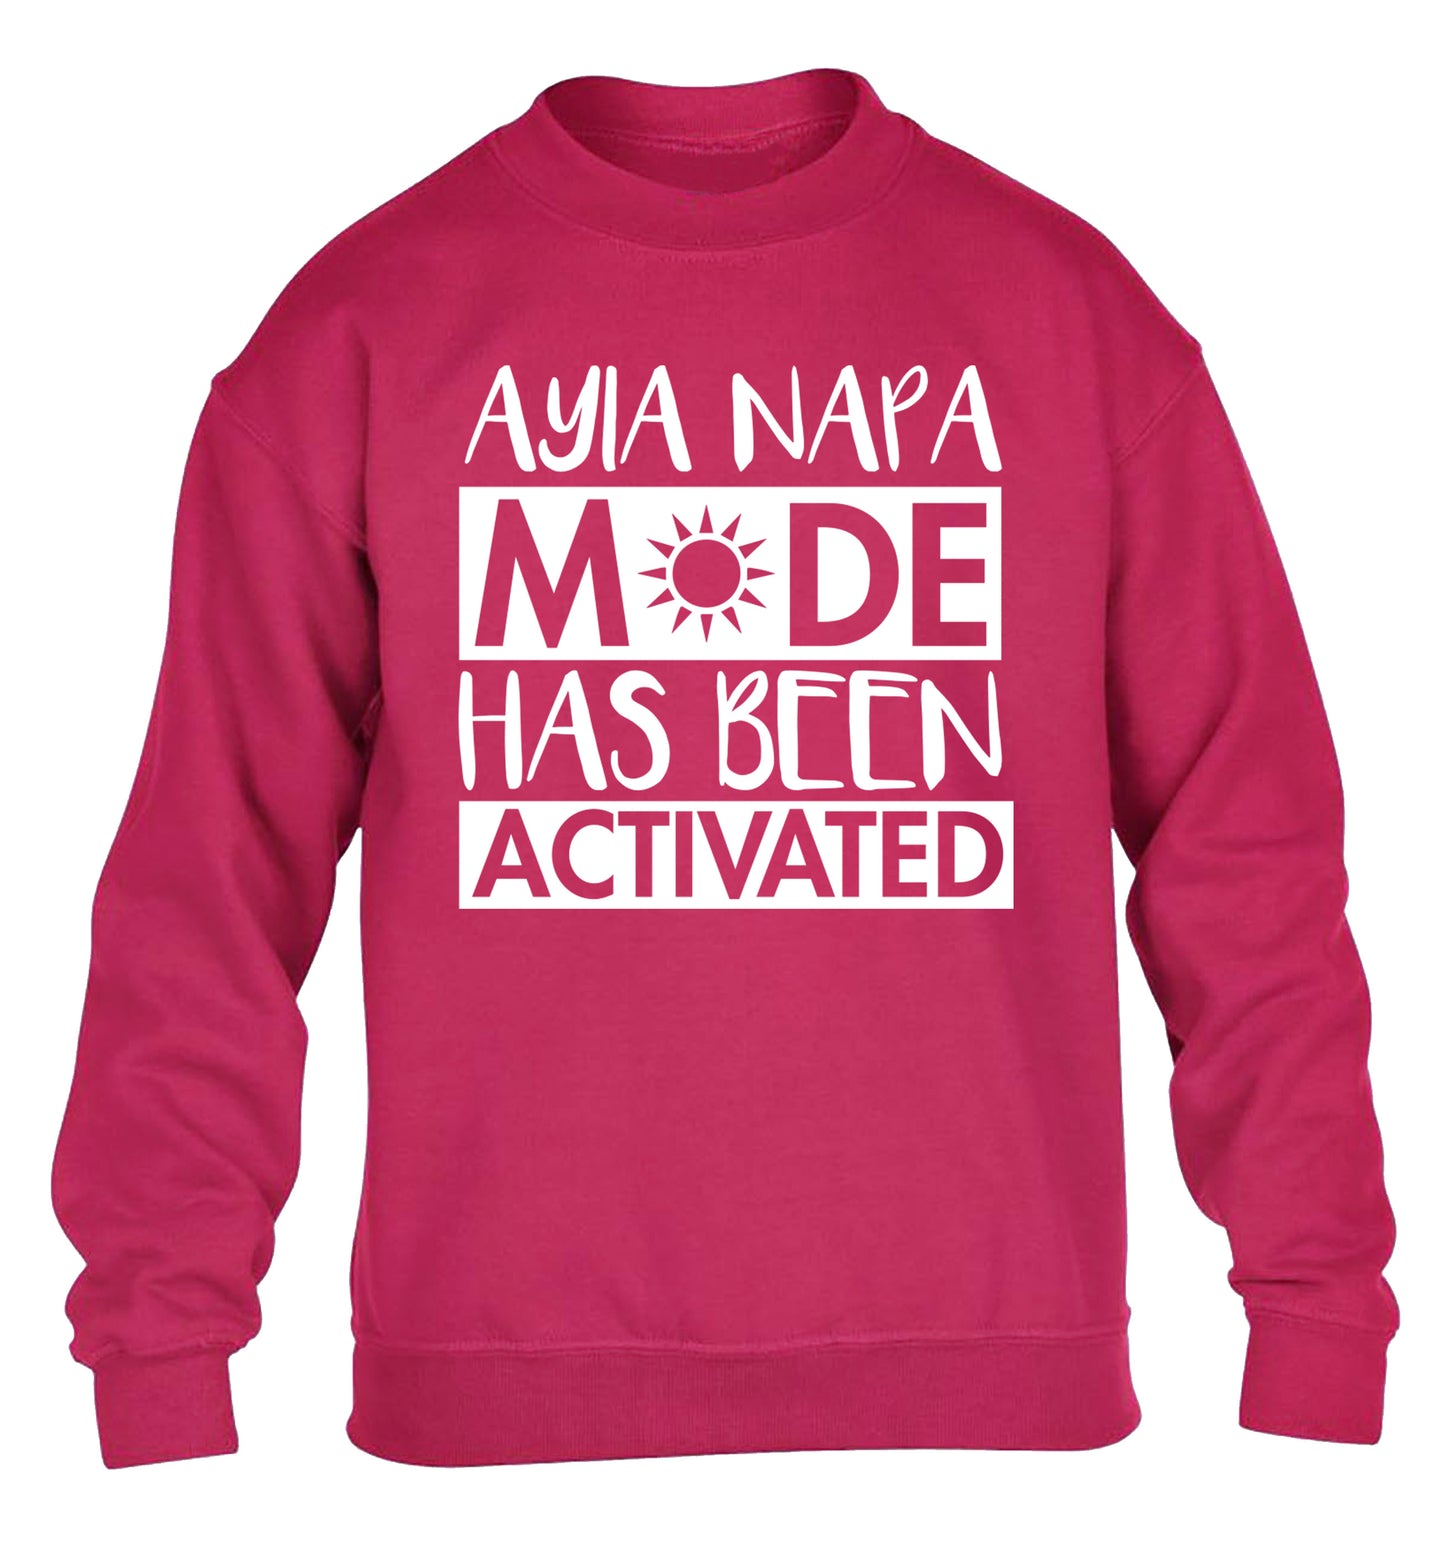 Ayia Napa mode has been activated children's pink sweater 12-13 Years